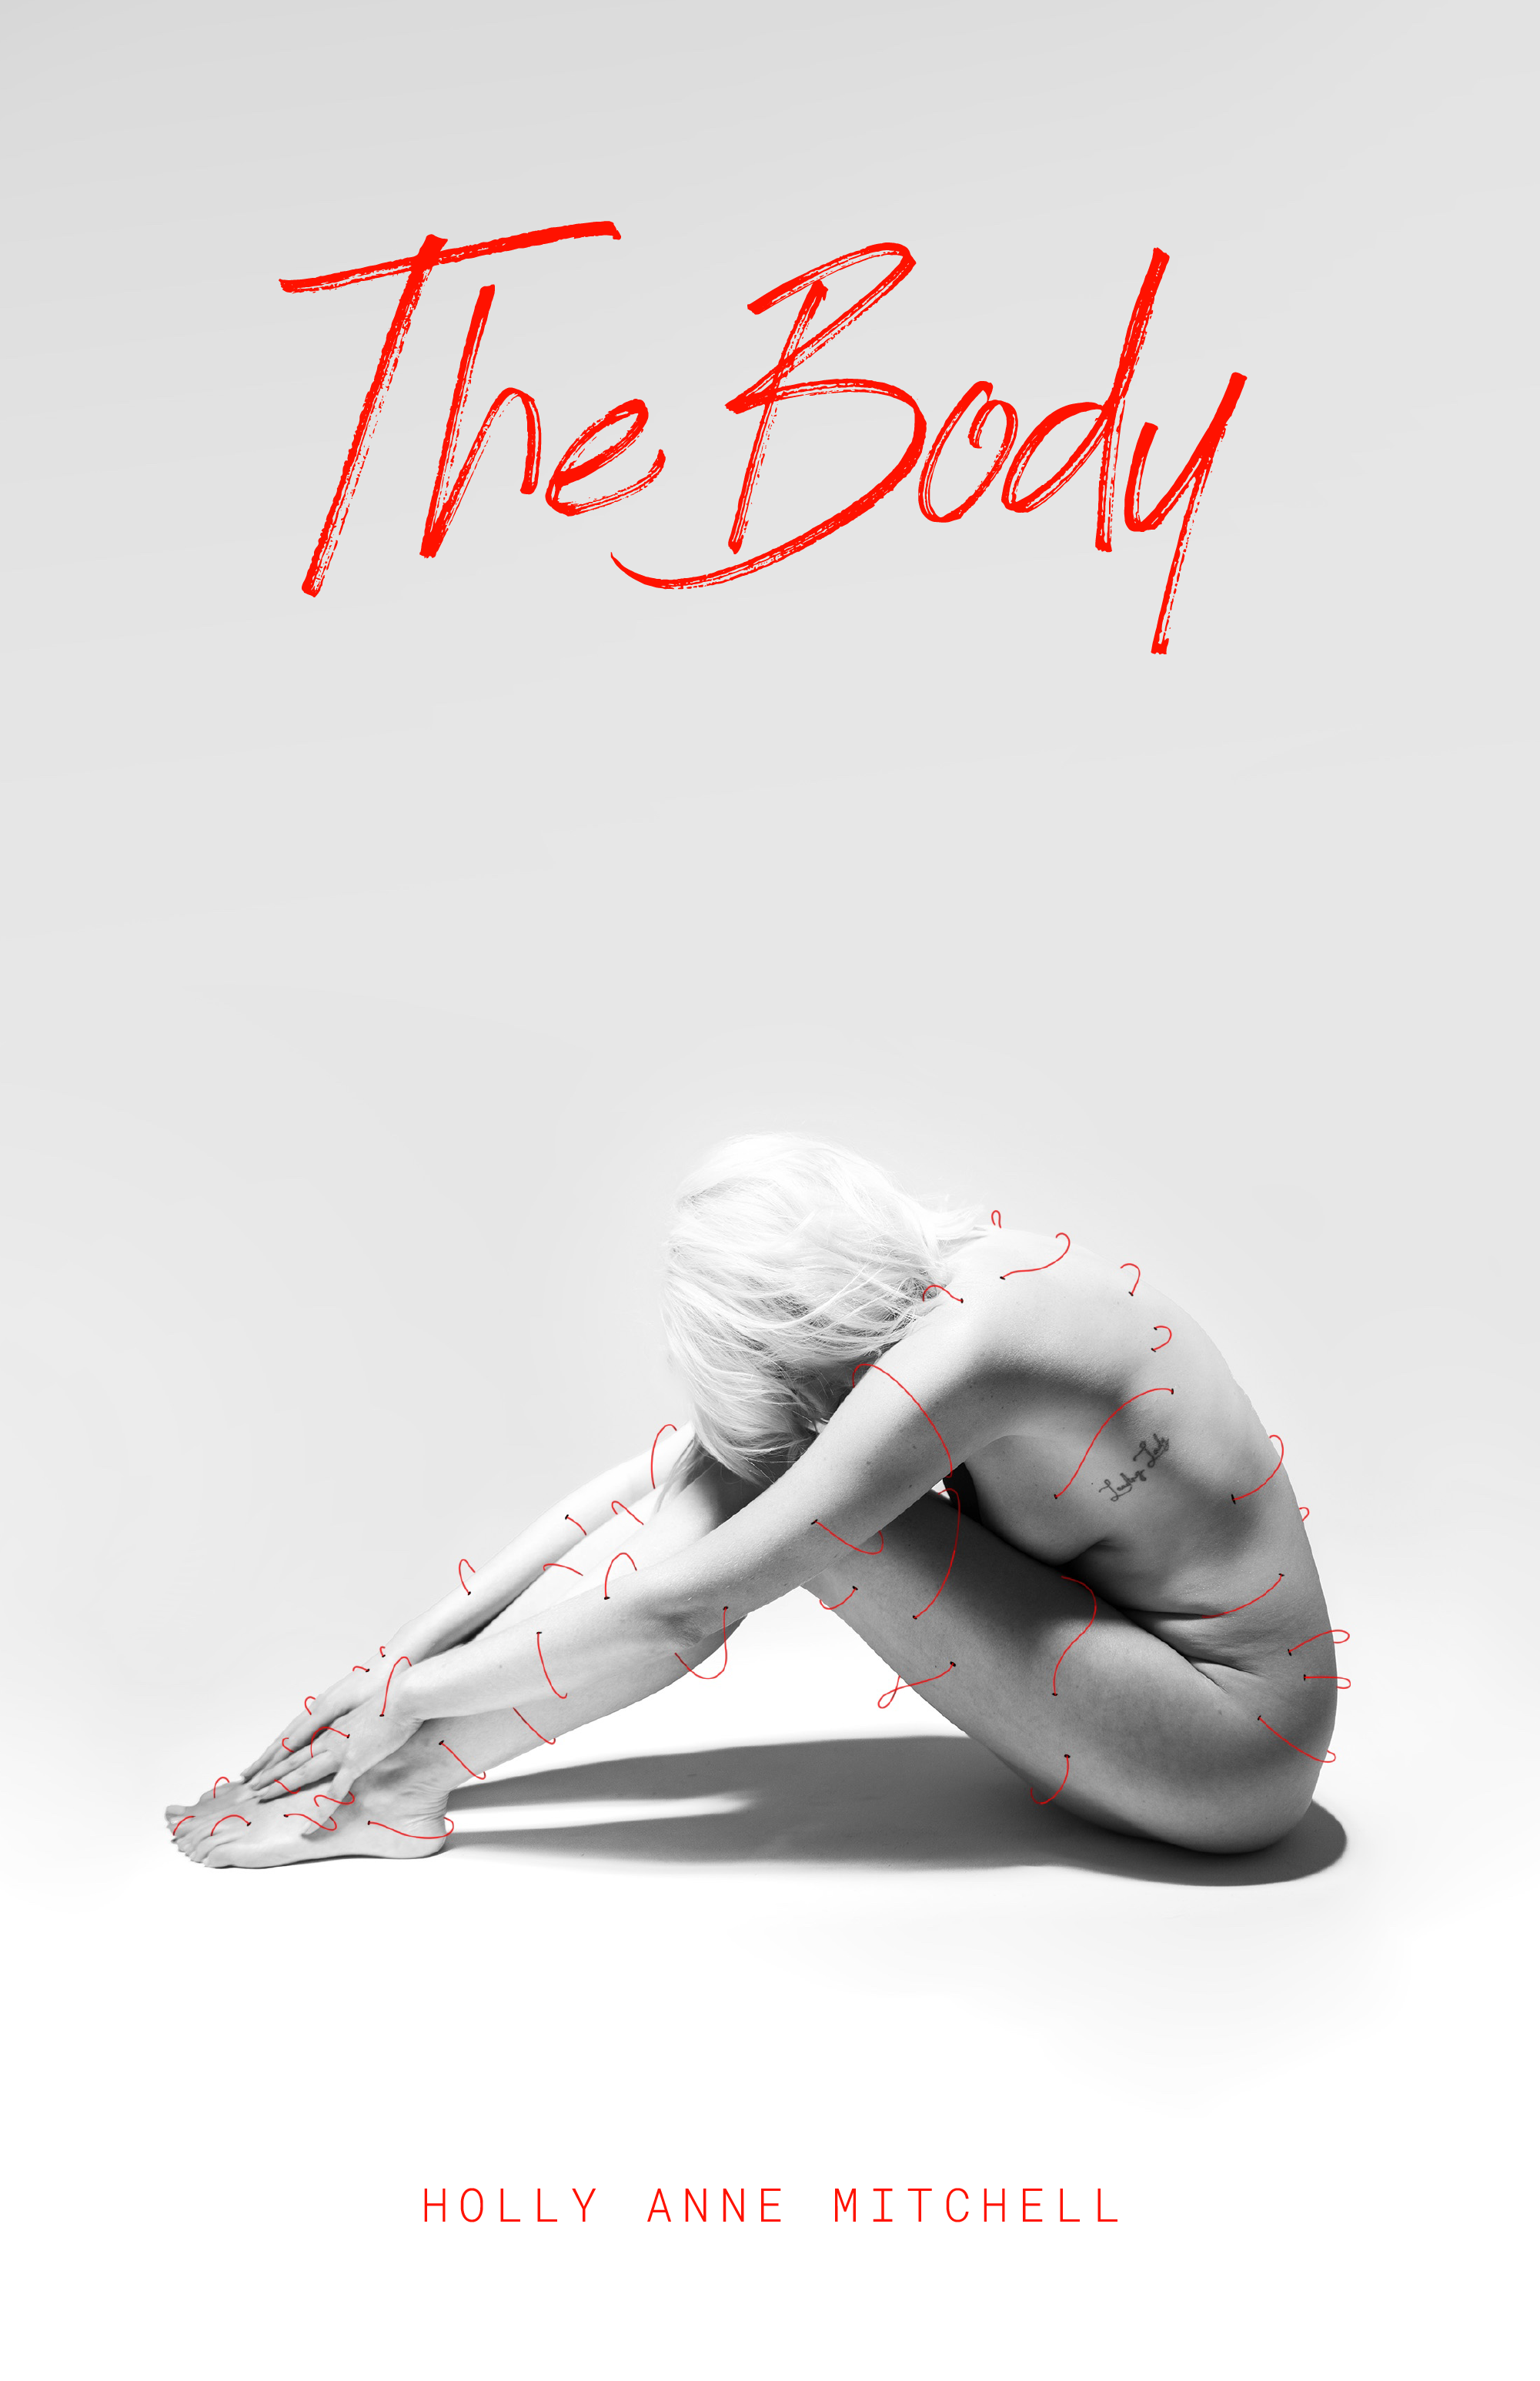 The front cover of The Body by Holly Anne Mitchell